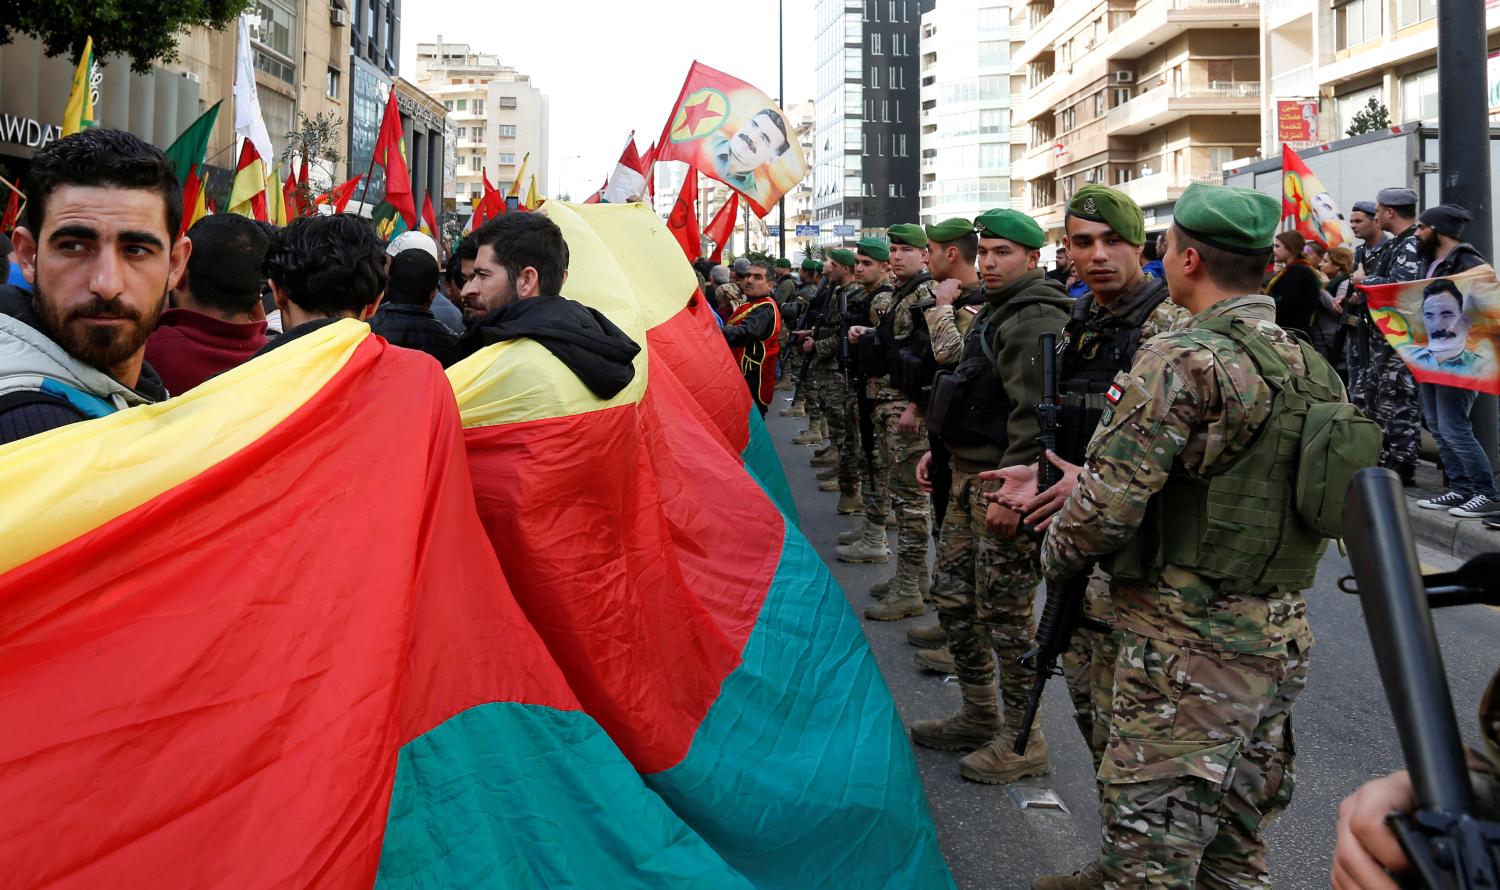 Kurdish protesters hold flags during a protest in front of the Russian embassy in Beirut, Lebanon January 22, 2018. REUTERS/Jamal Saidi - RC116BE54E90